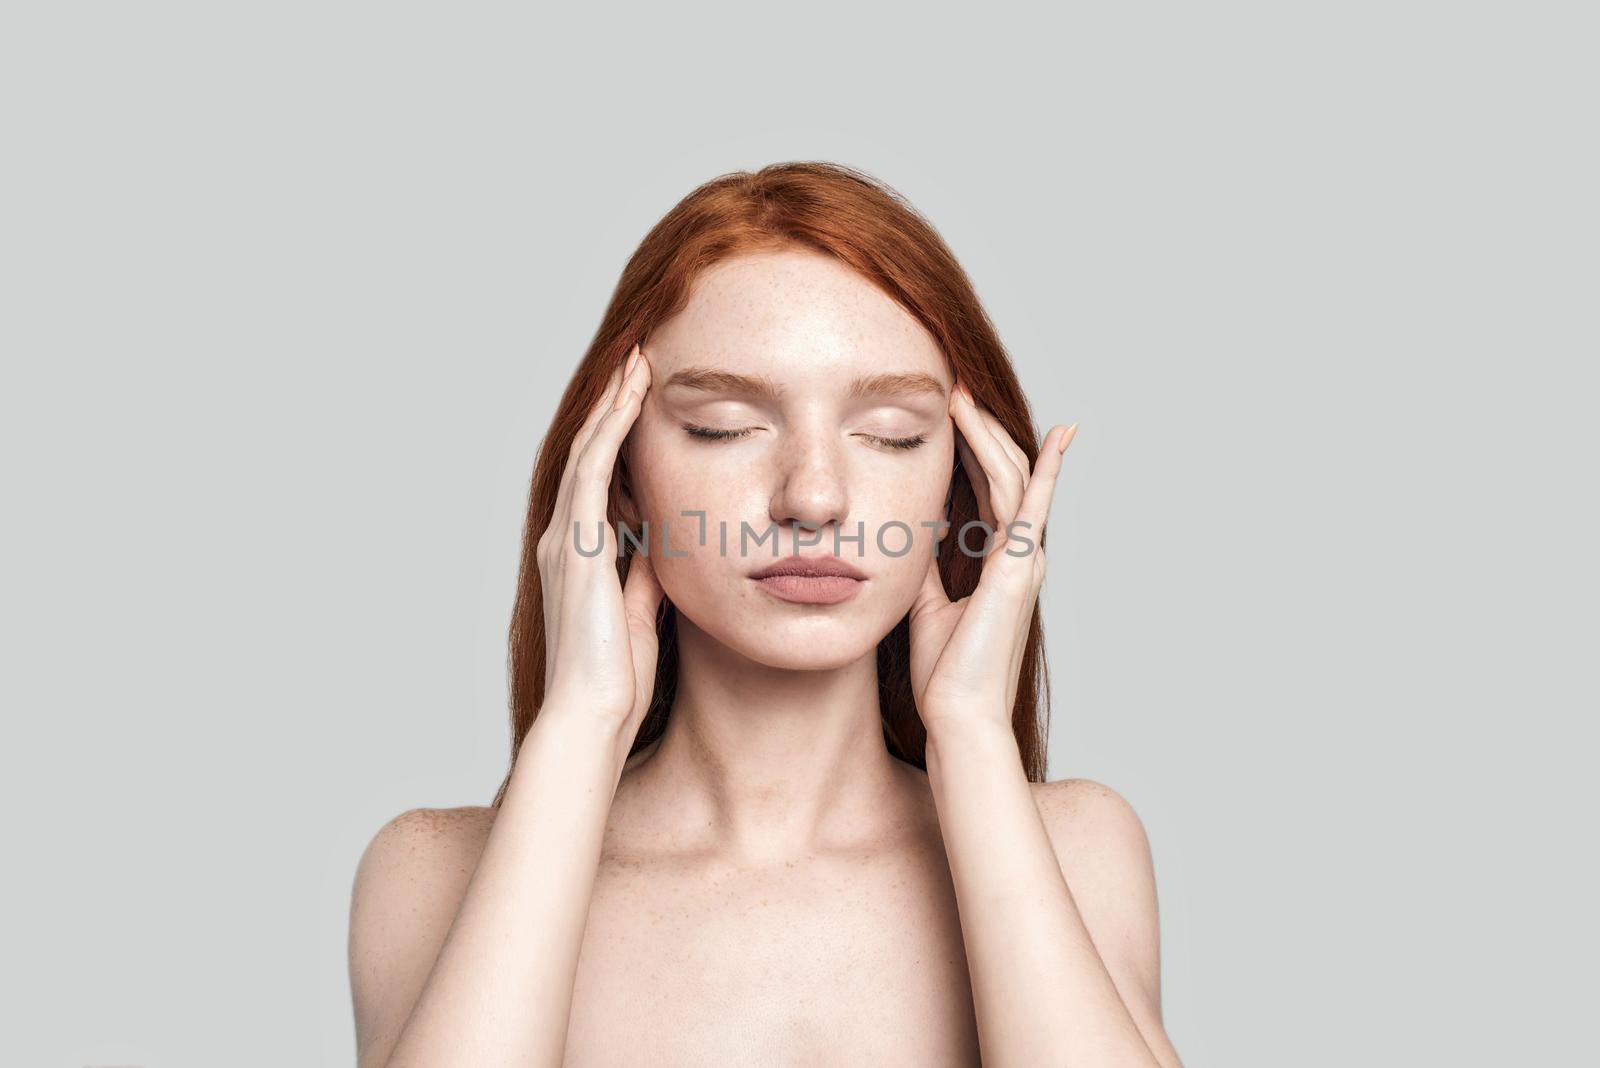 Studio shot of beautiful redhead woman keeping eyes closed and touching head with hands while standing against grey background